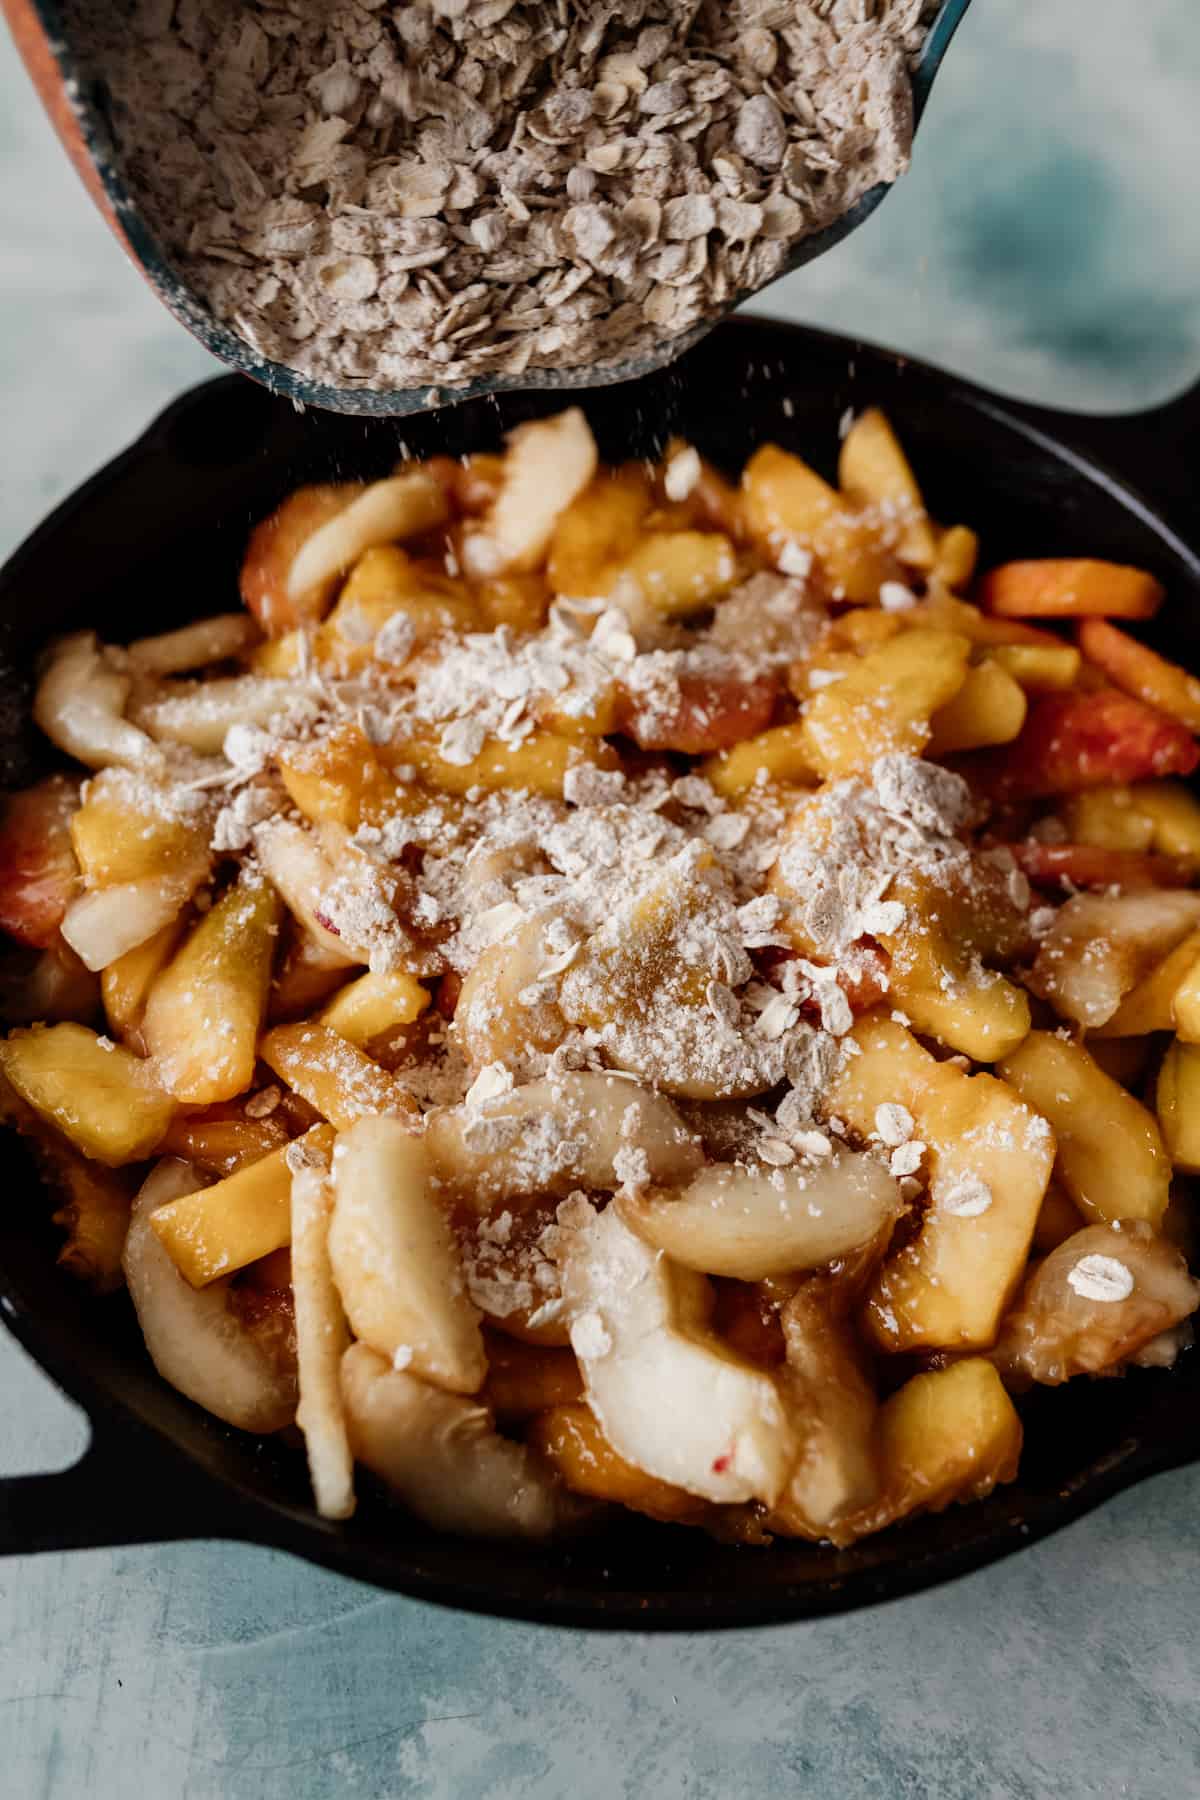 sprinkling oats over sliced peaches in a cast iron skillet for a peach crisp.